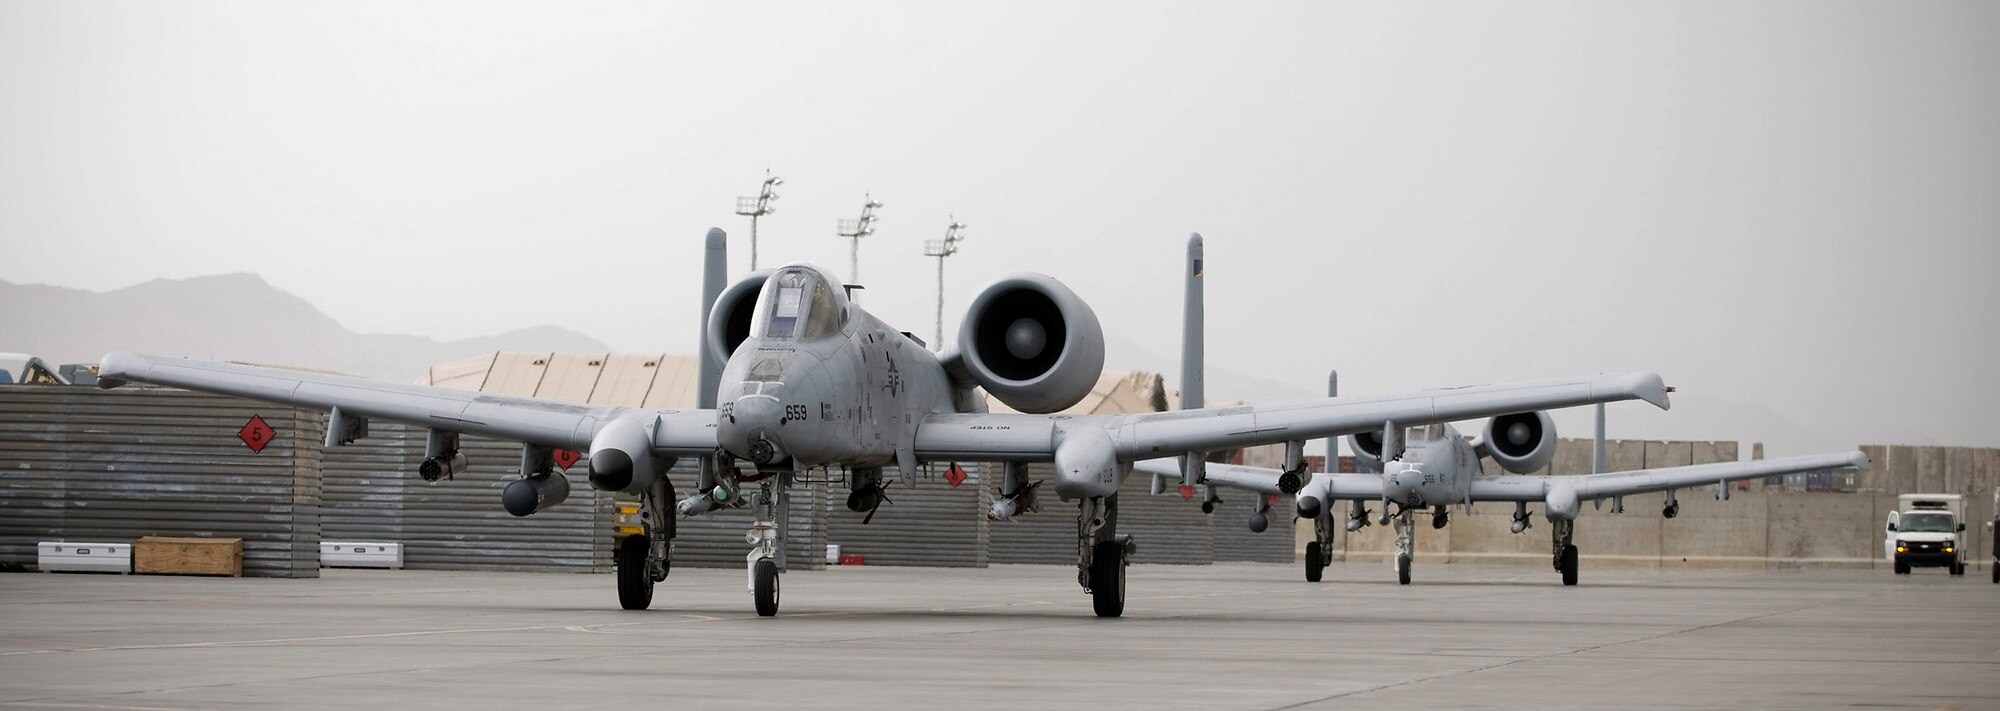 Two A-10 Thunderbolt II jets taxi out to the runway July 26 at Bagram Airfield, Afghanistan.  The jets are experts at close air support missions and have proven to be invaluable despite being well past their expected useful lifespan. (U.S. Air Force photo/Staff Sgt. Samuel Morse) 